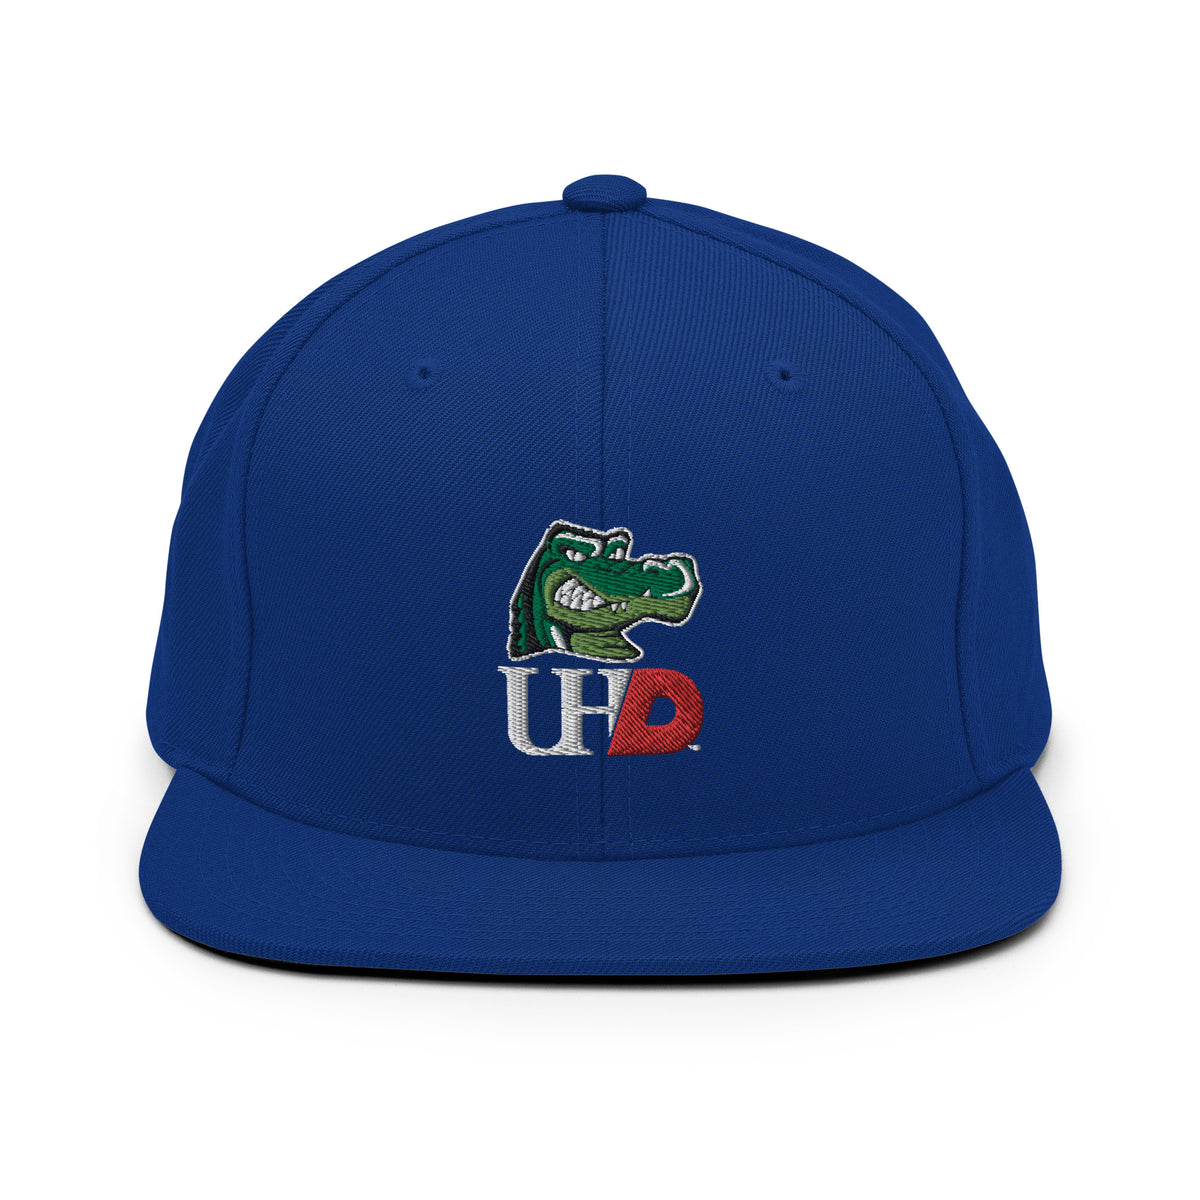 University of Houston Downtown | On Demand | Embroidered Snapback Hat